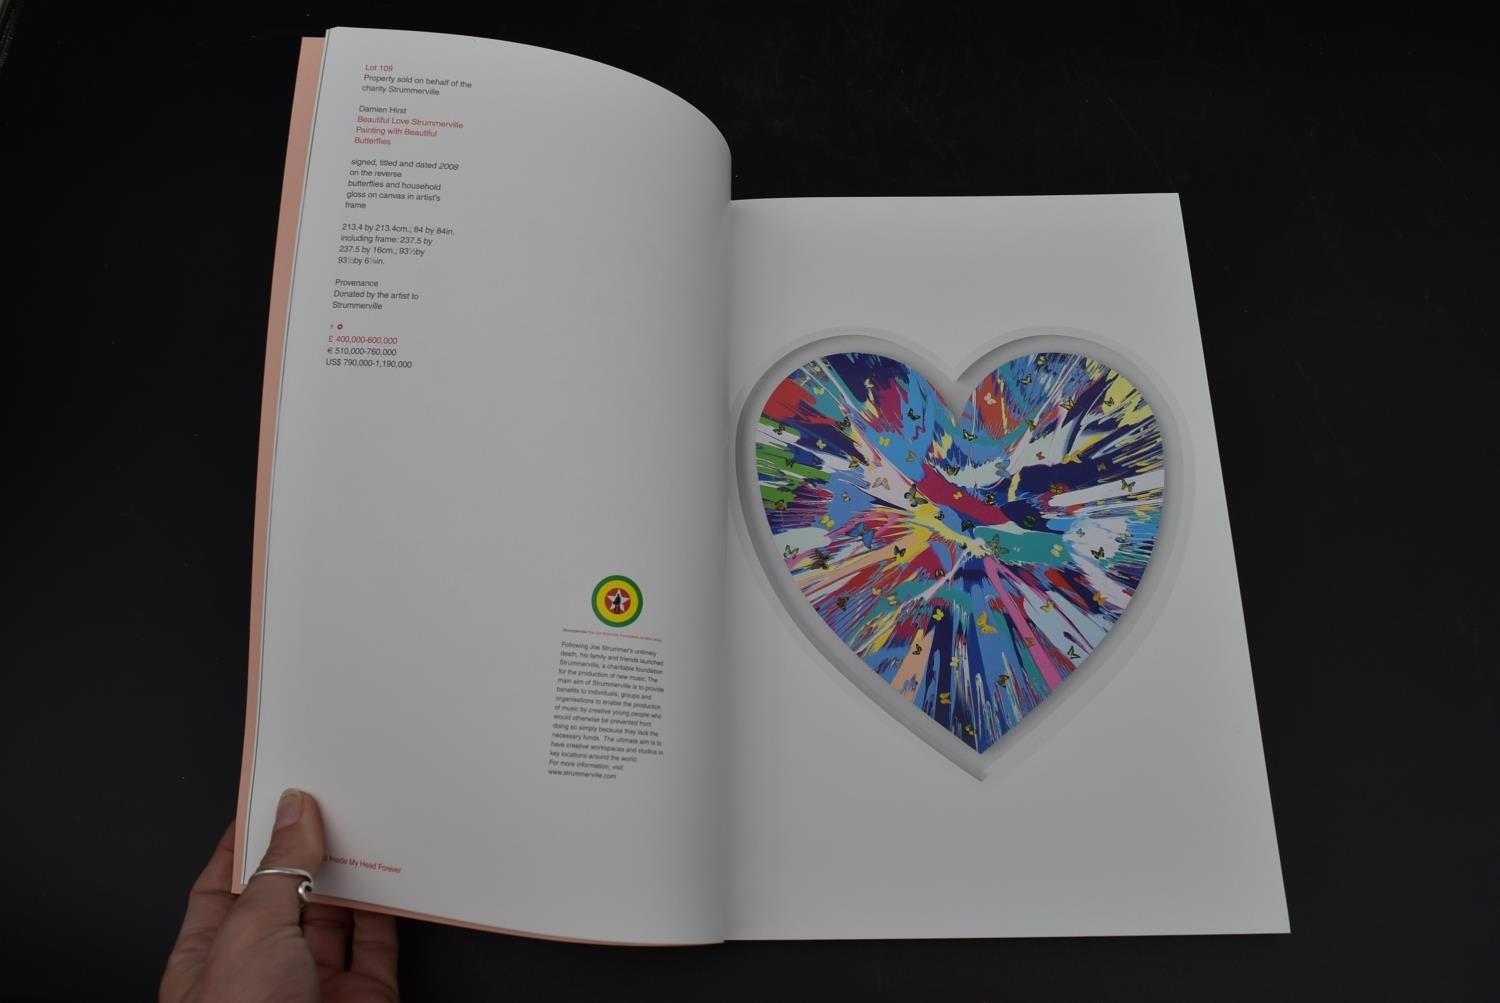 A collection of Antique and Art catalogues. Including a Sotheby's Damien Hirst Beautiful Inside Head - Image 20 of 28